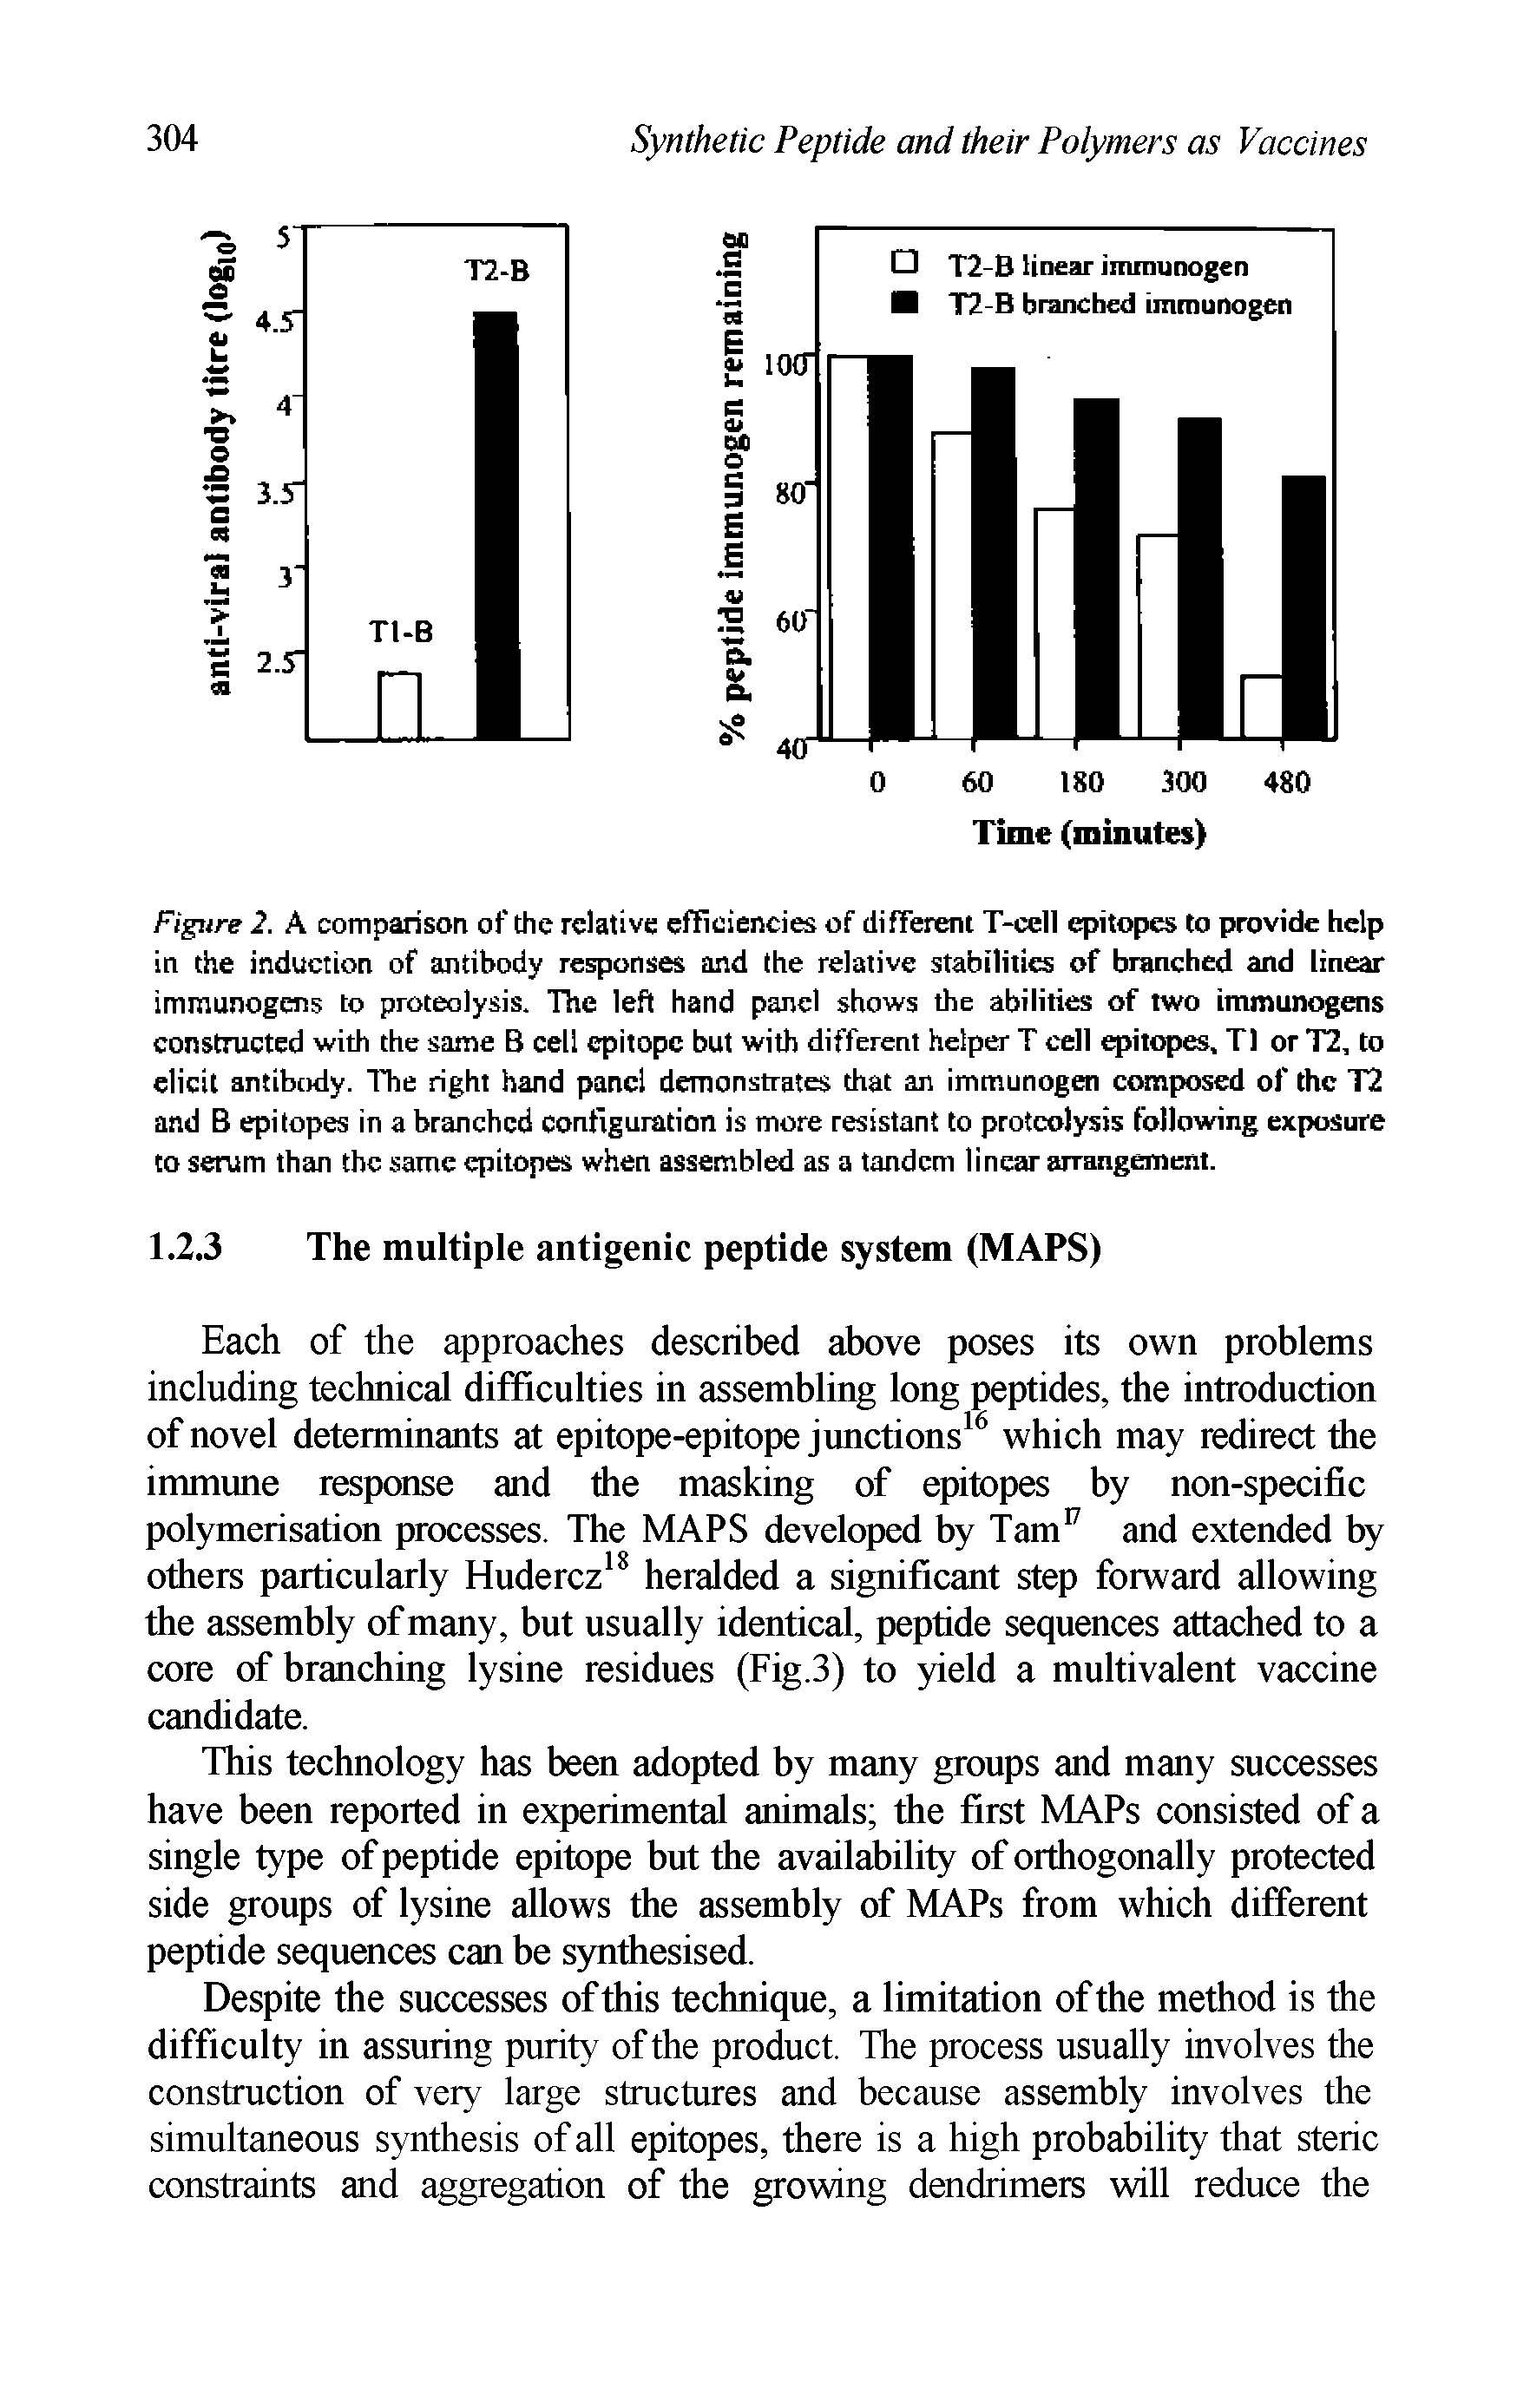 Figure 2. A comparison of the relative efficiencies of different T-cell epitopes to provide help in the induction of antibody responses and the relative stabilities of branched and linear immunogens to proteolysis. The left hand panel shows the abilities of two immunogens constructed with the same B cell epitope but with different helper T cell qpitopes. T1 or T2, to elicit antibody. The right hand panel demonstrates that an immunogen c< npased of the T2 and B epitopes in a branched configuration is more resistant to proteolysis following exposure to serum than the same epitopes when assembled as a tandem linear arrangement.